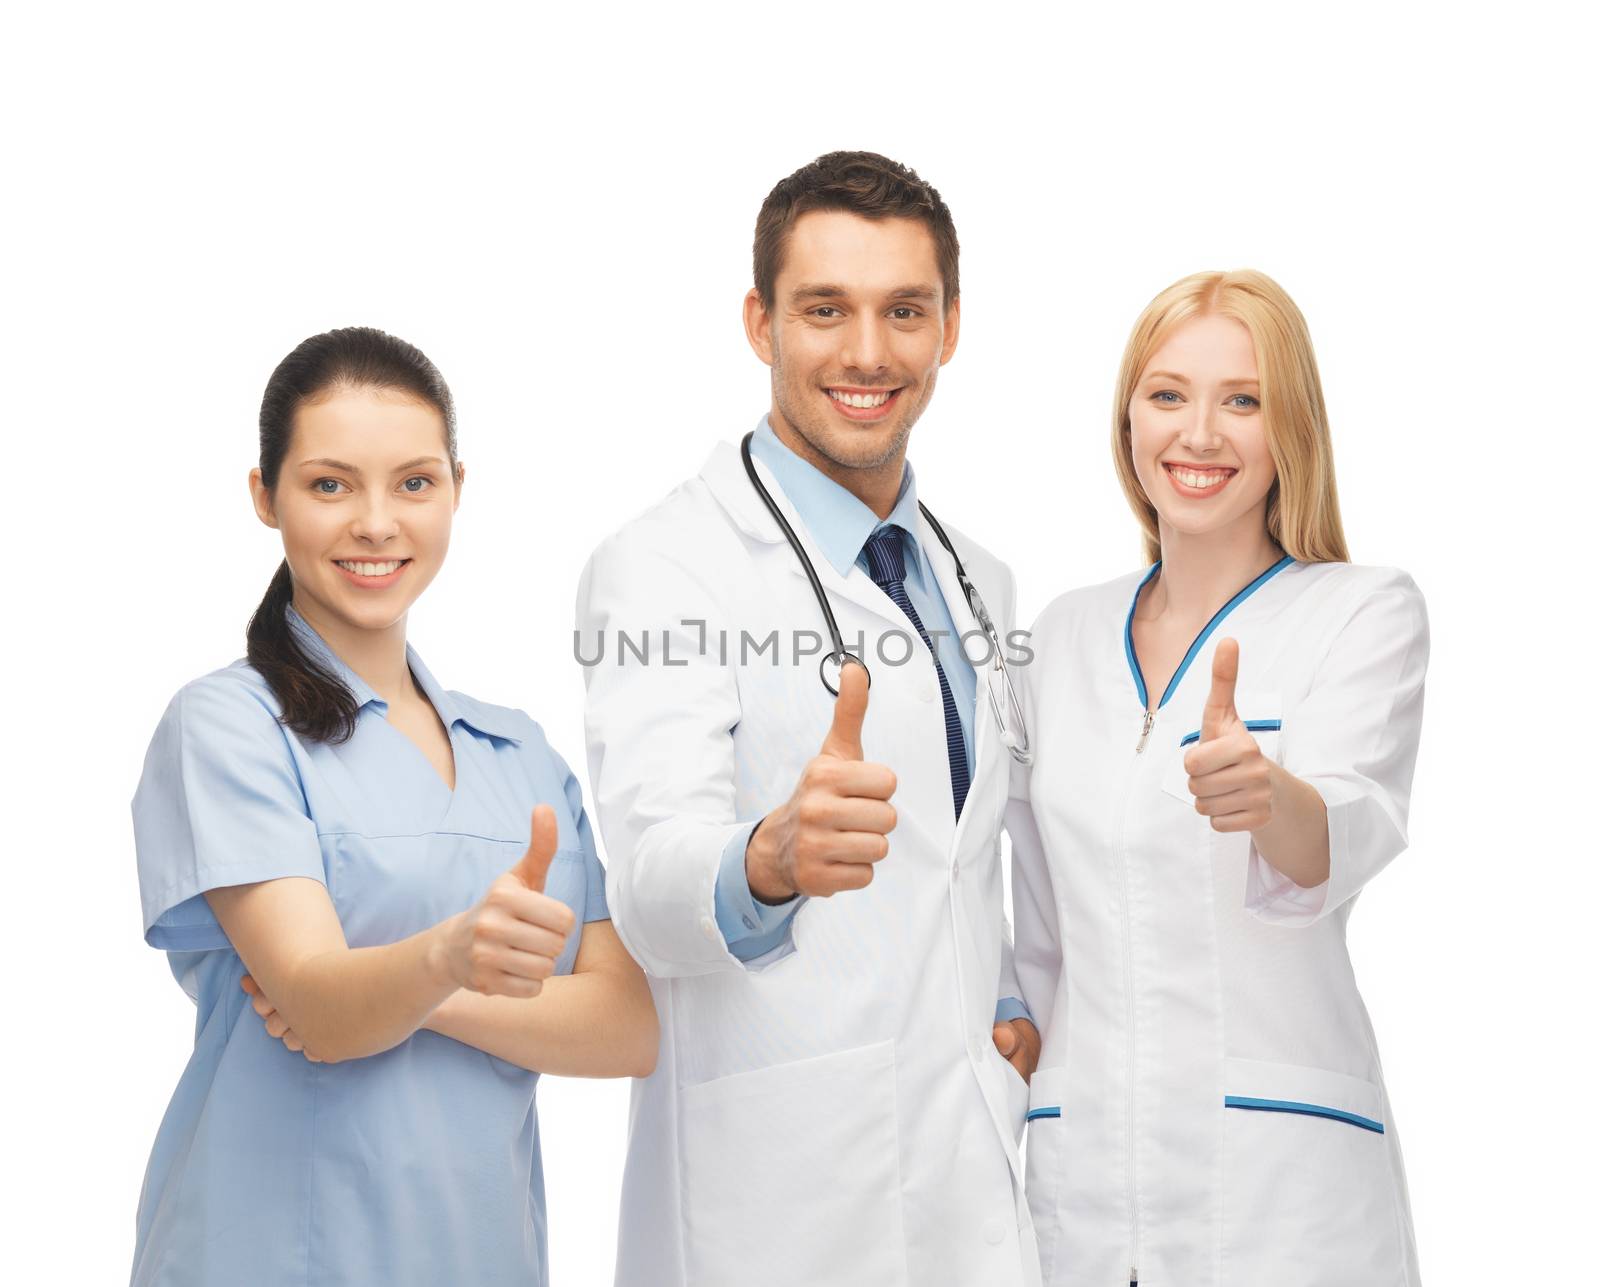 professional young team or group of doctors showing thumbs up